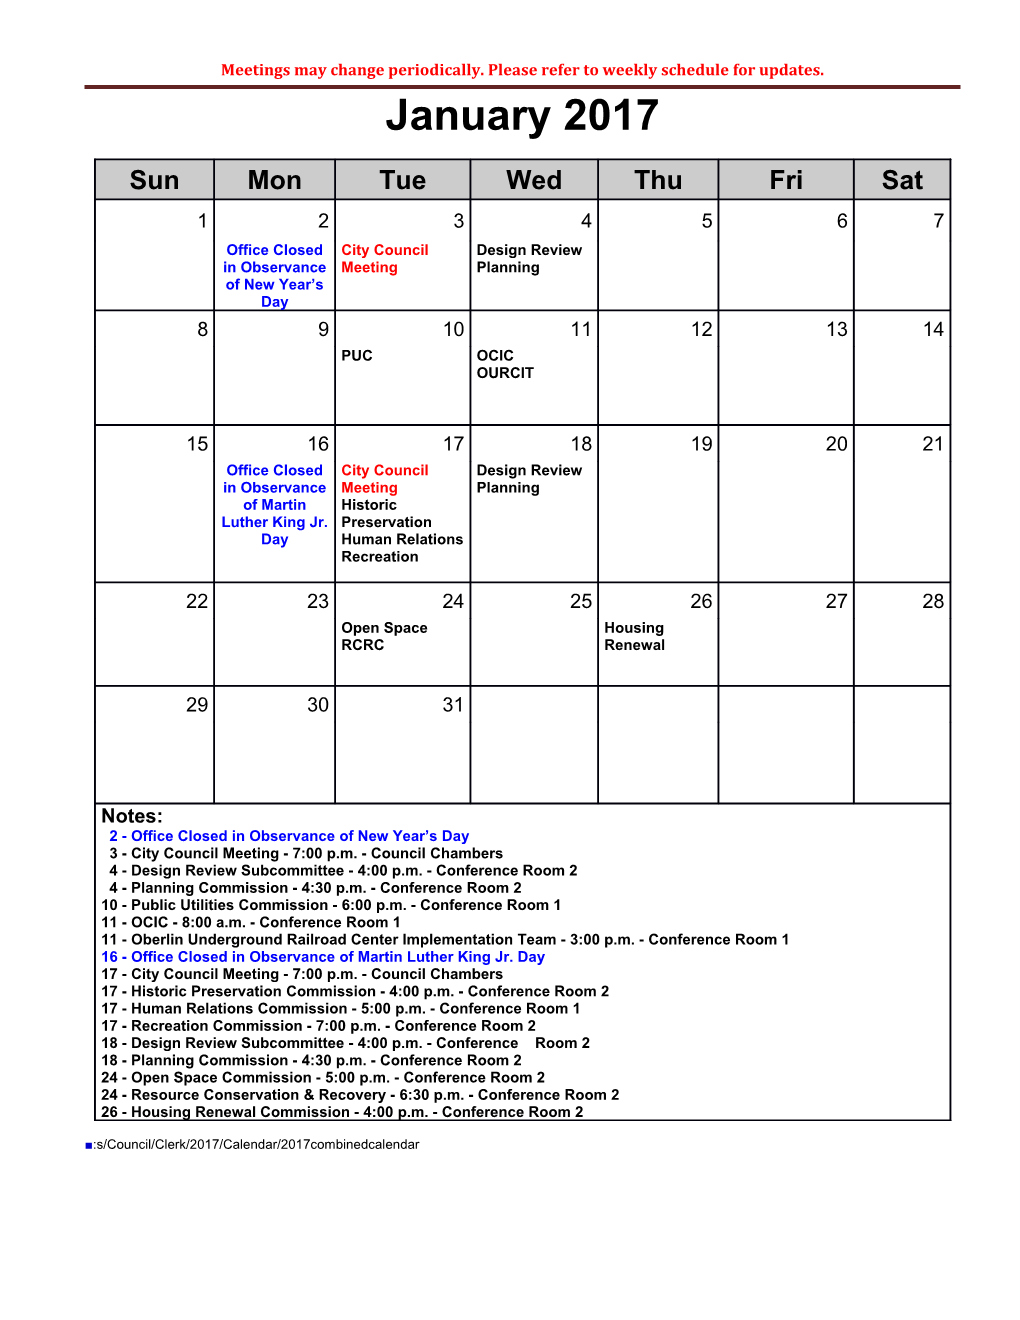 Meetings May Change Periodically. Please Refer to Weekly Schedule for Updates